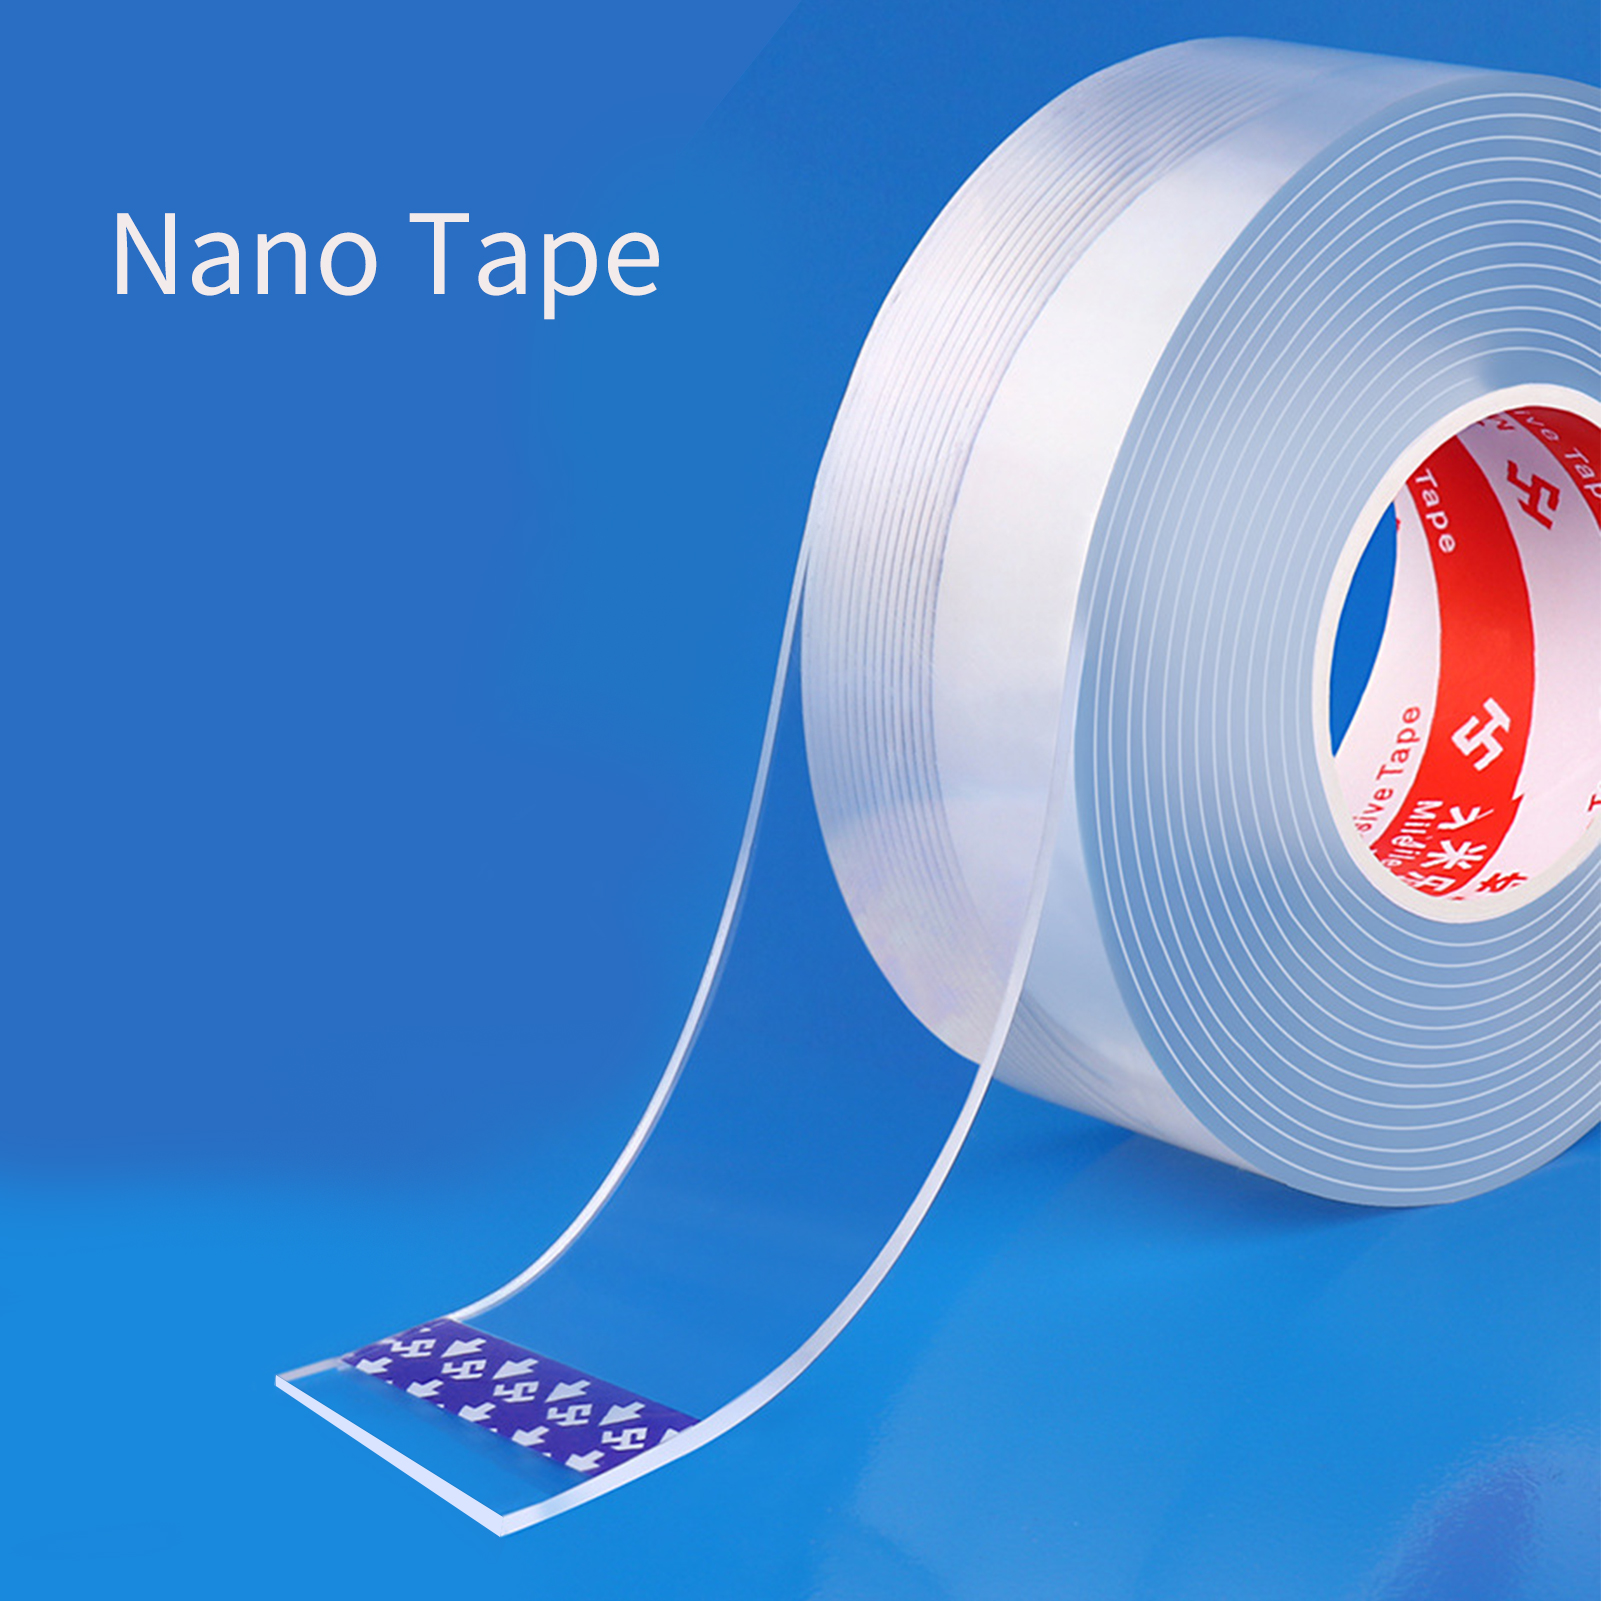 Nano Tape Heavy Duty Double Sided Mounting Adhesive Tape Washable Removable Tapes for Indoor Outdoor Walls Fixing Office Supplie